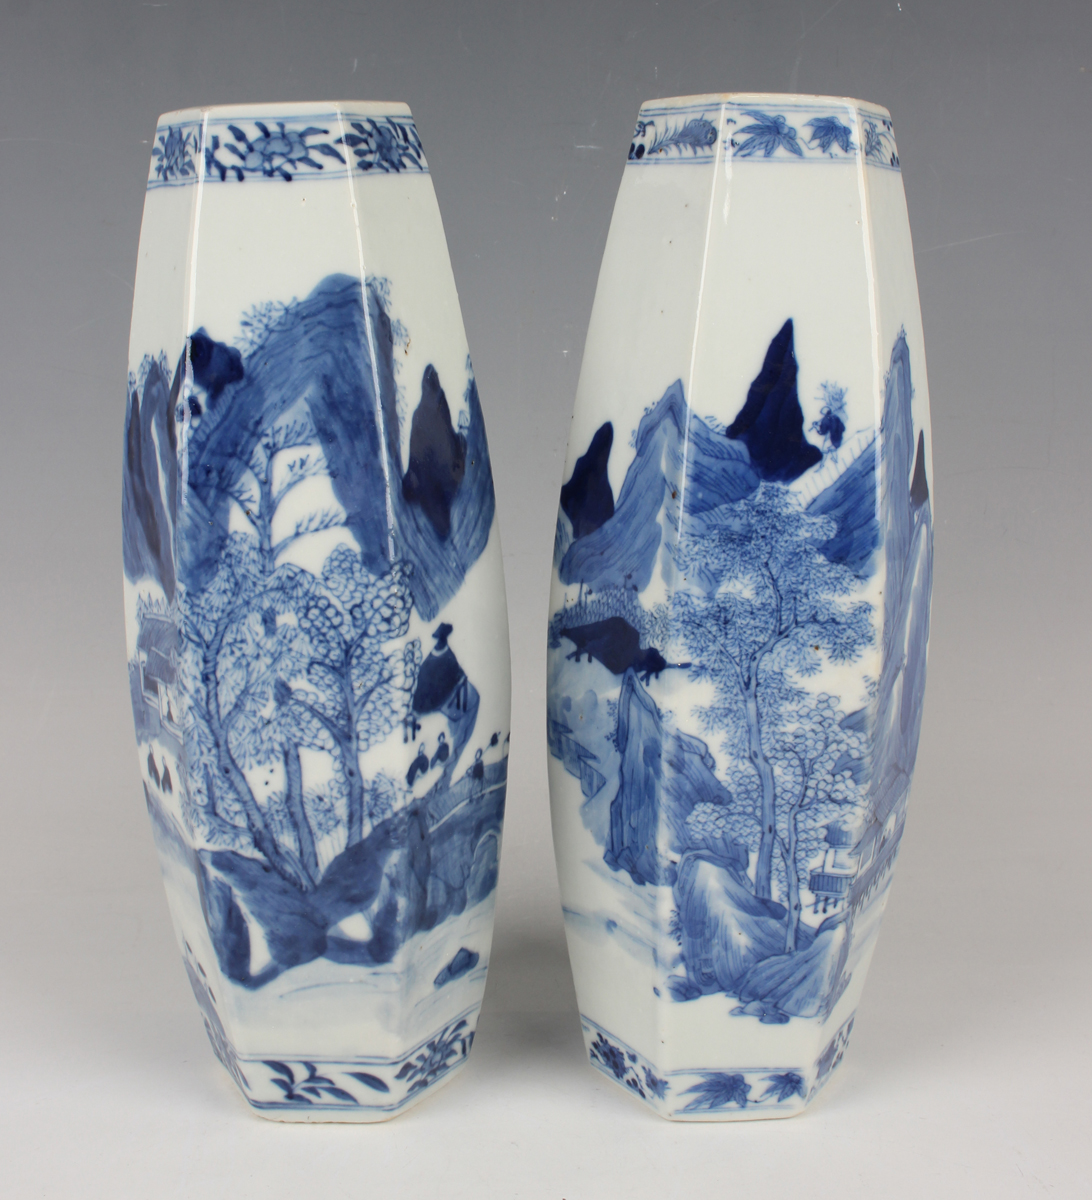 A pair of Chinese blue and white porcelain vases, mark of Kangxi but late 19th century, each of